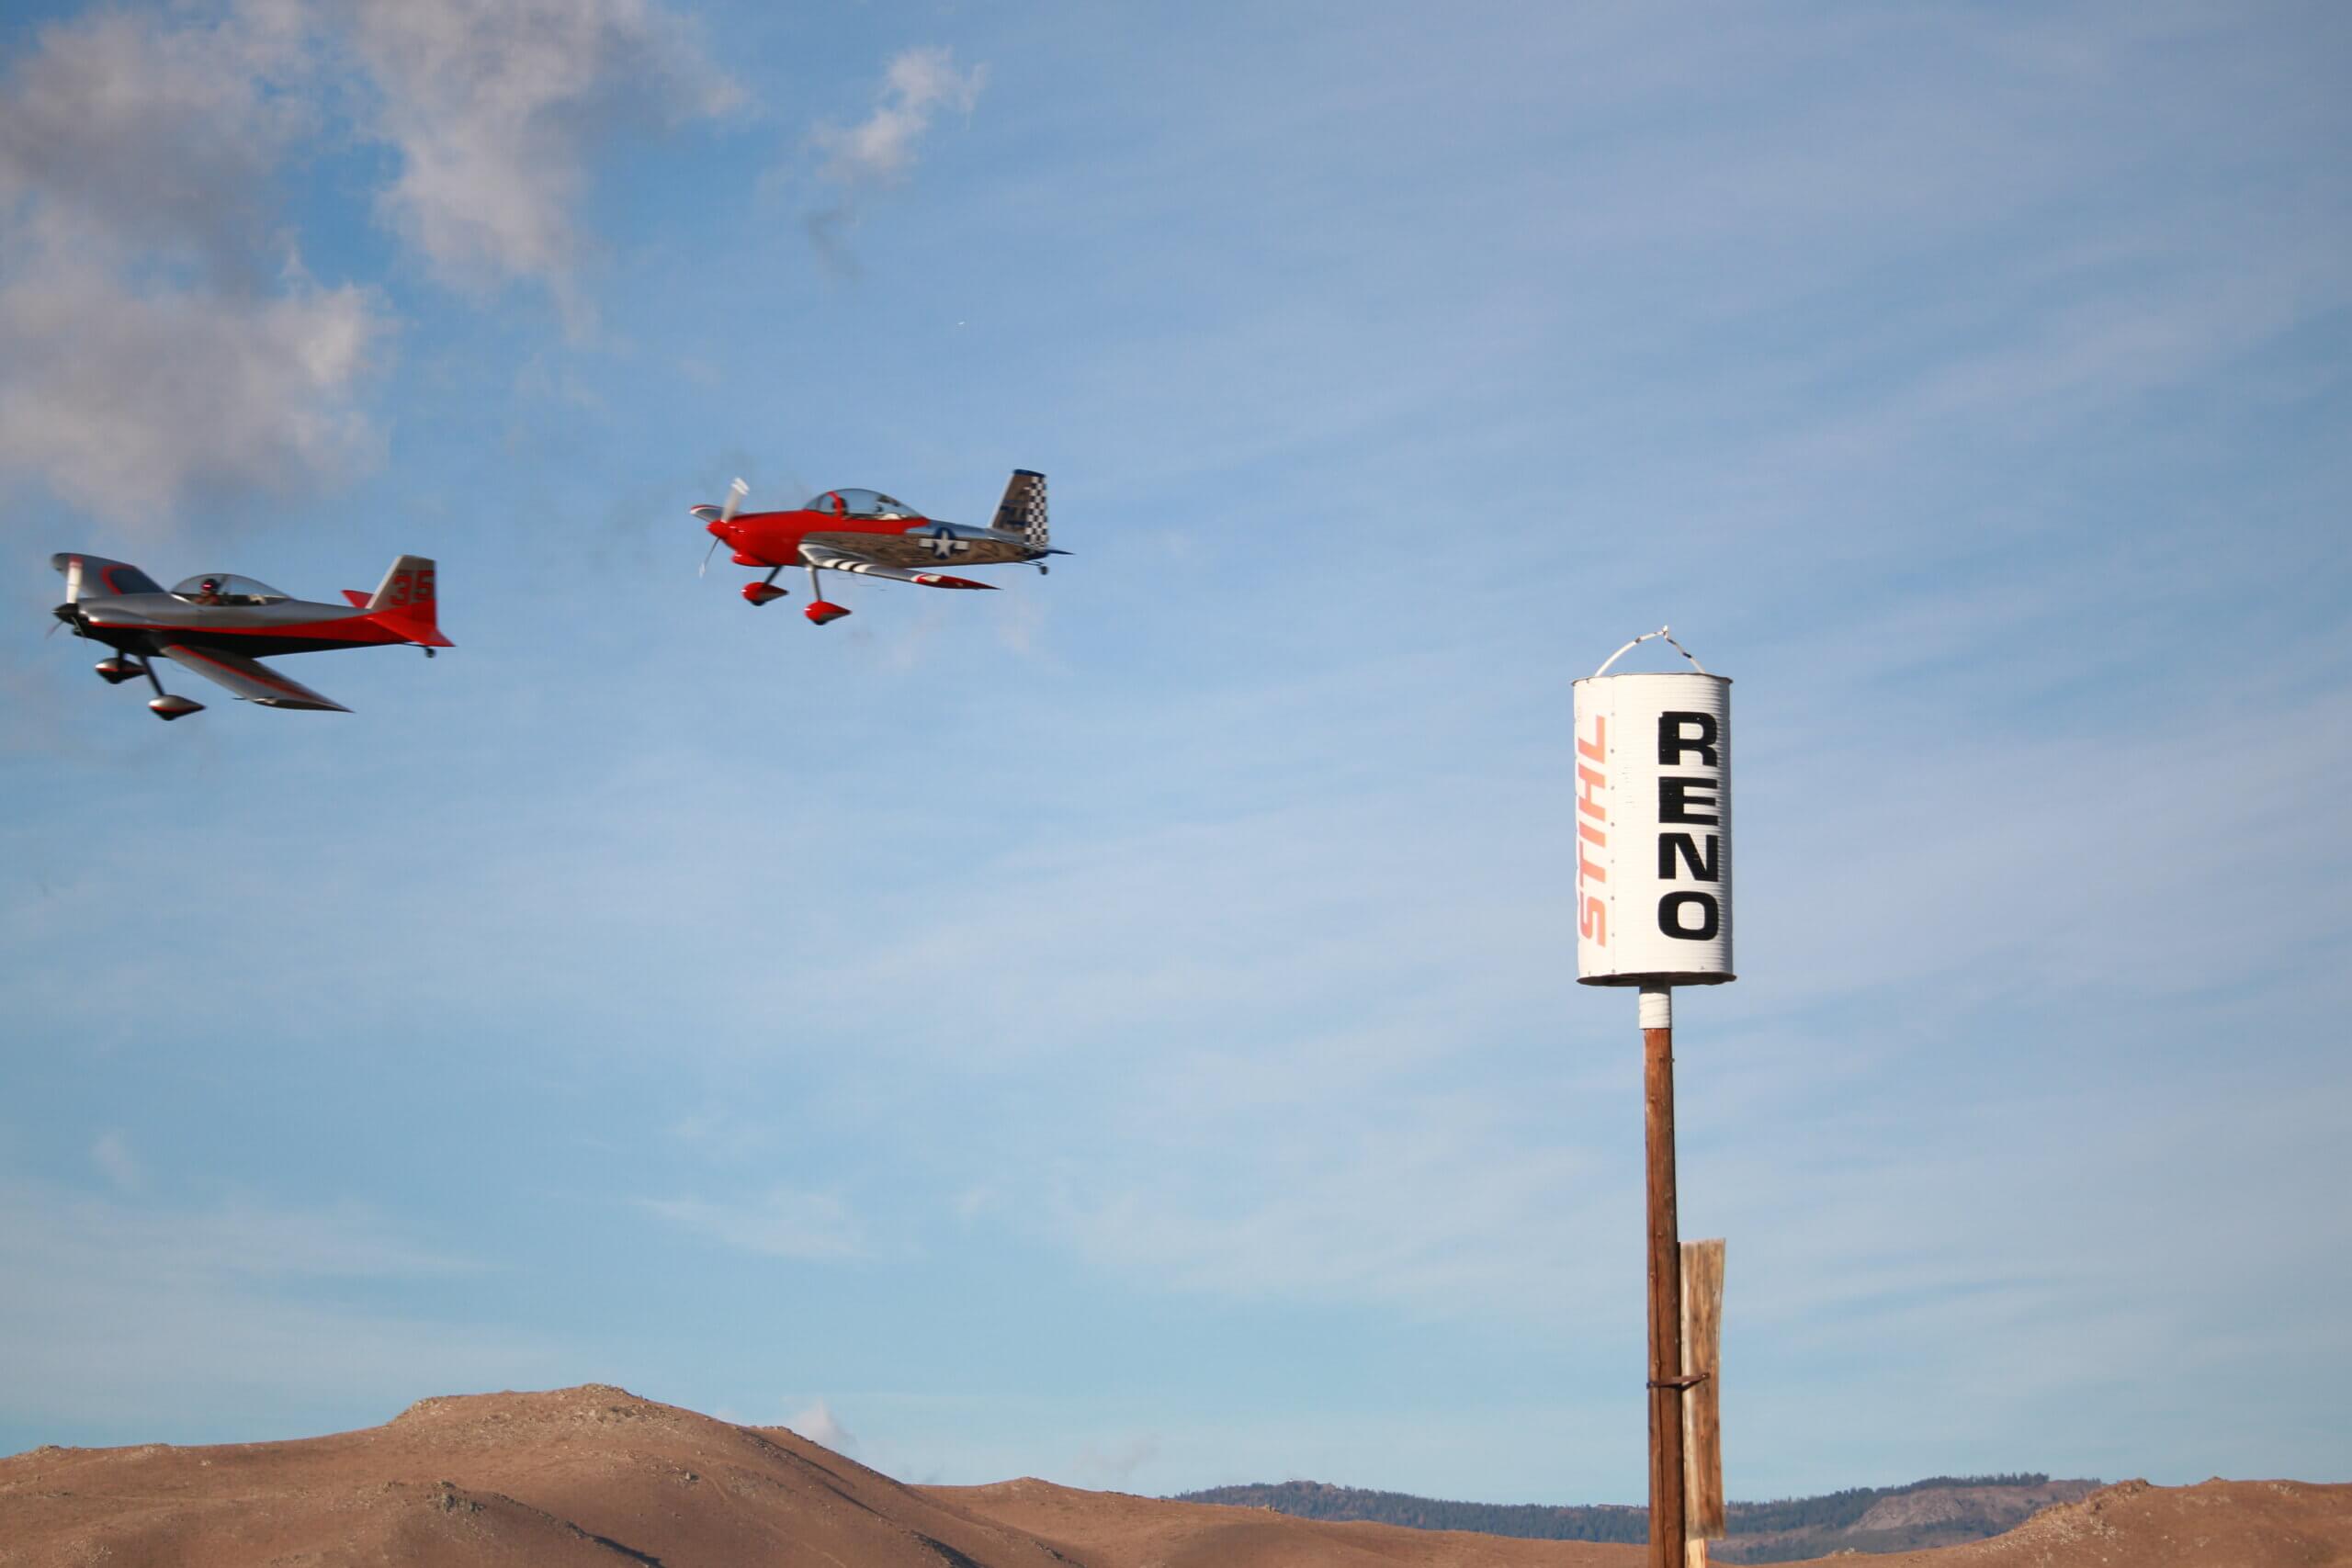 Two Sport class planes compete at Reno